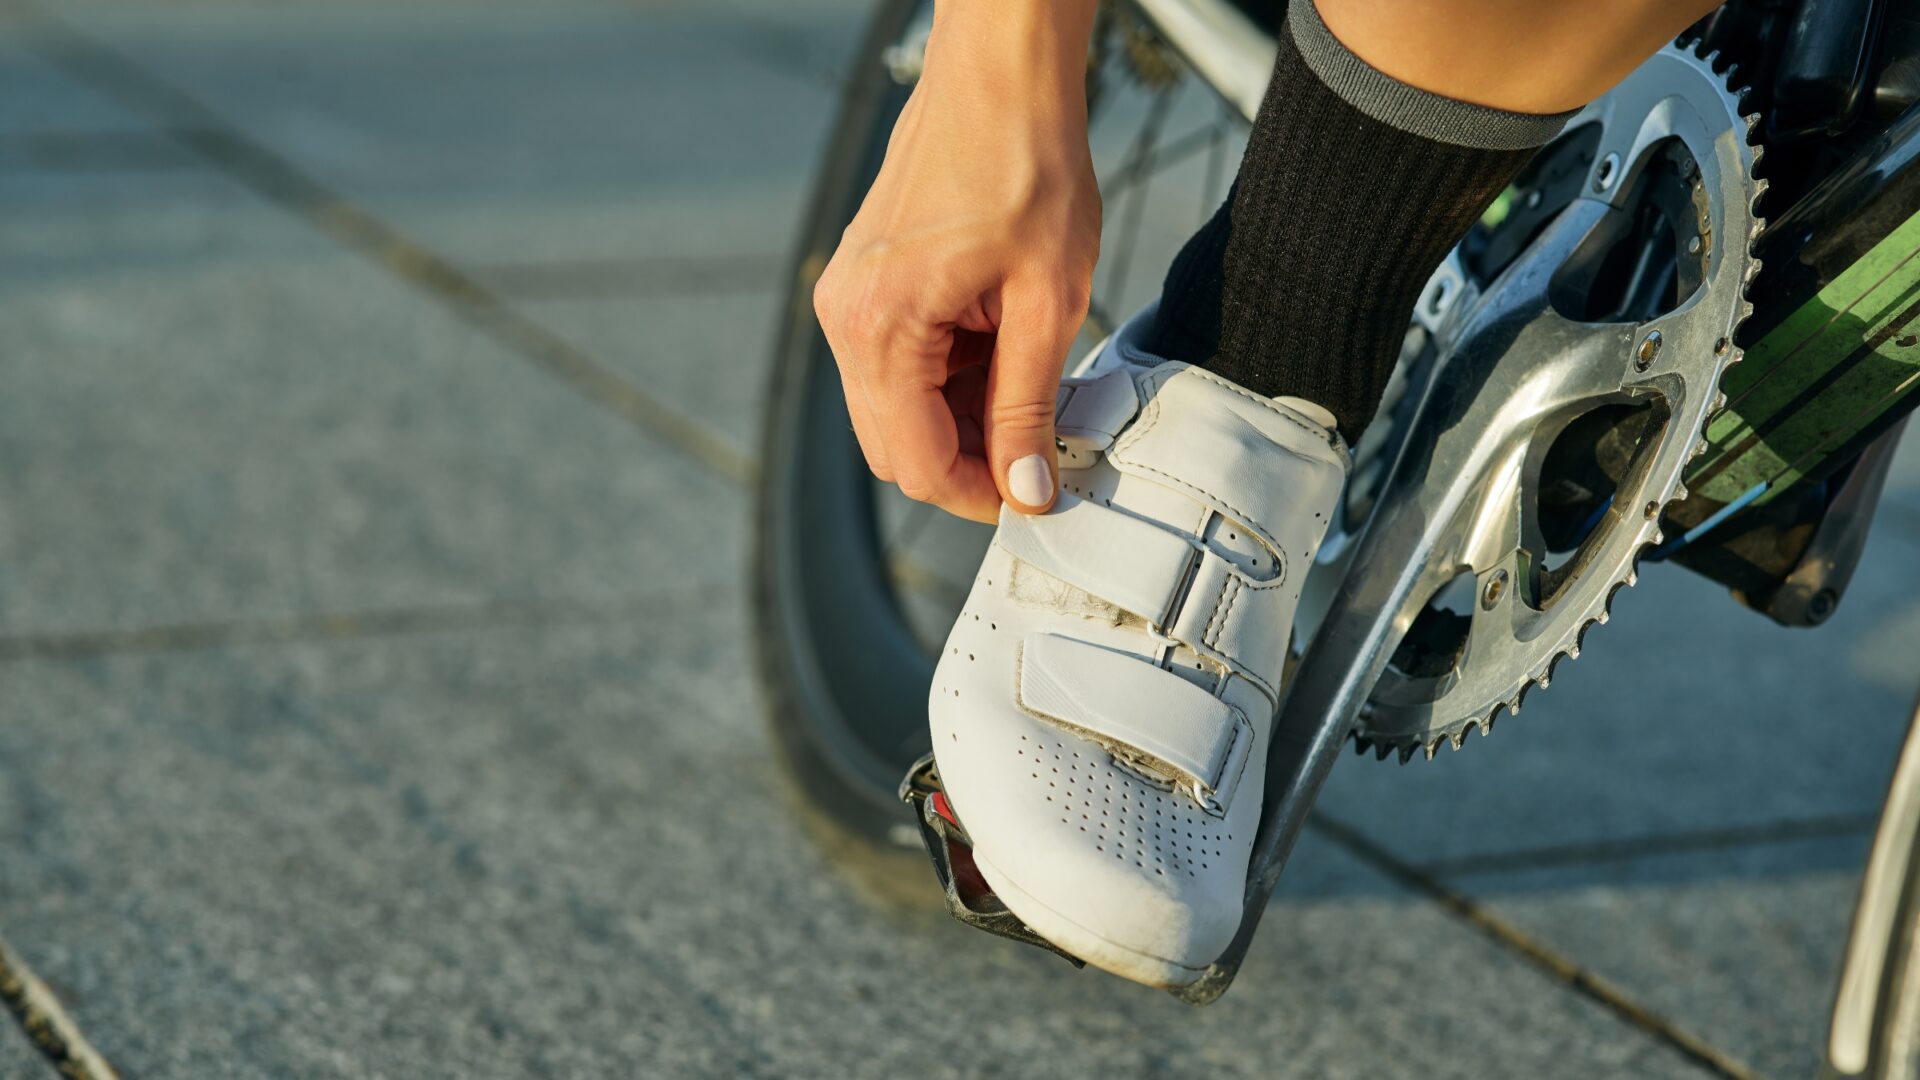 A woman tightens the strap on her white cycling cleat.